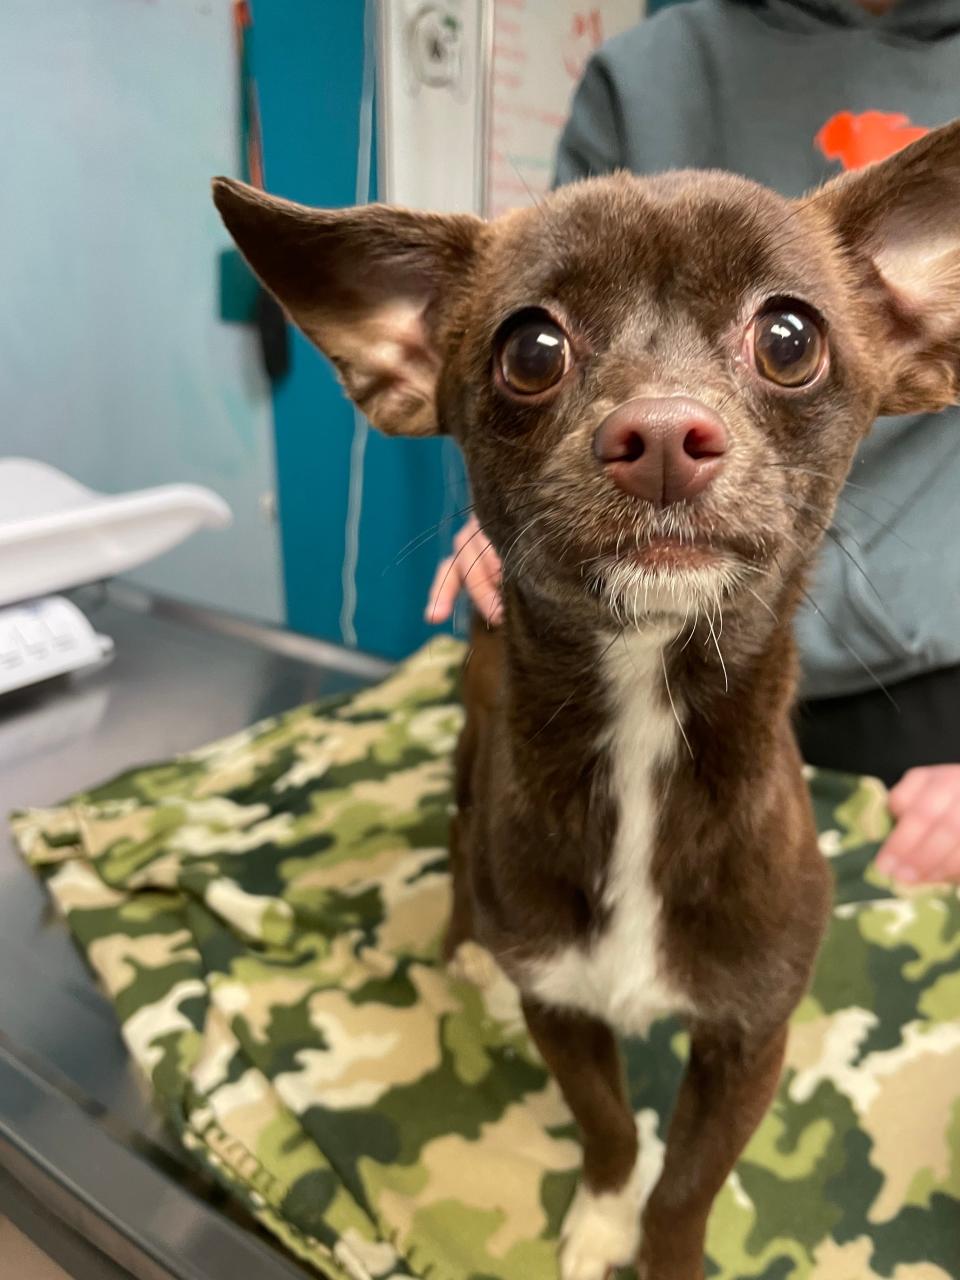 A Chihuahua, dubbed Coco, was found tied up in several bags discarded along the railroad tracks in Vineland on Feb.19. A $1K reward is posted for the tip that leads to the arrest and conviction of the person responsible.